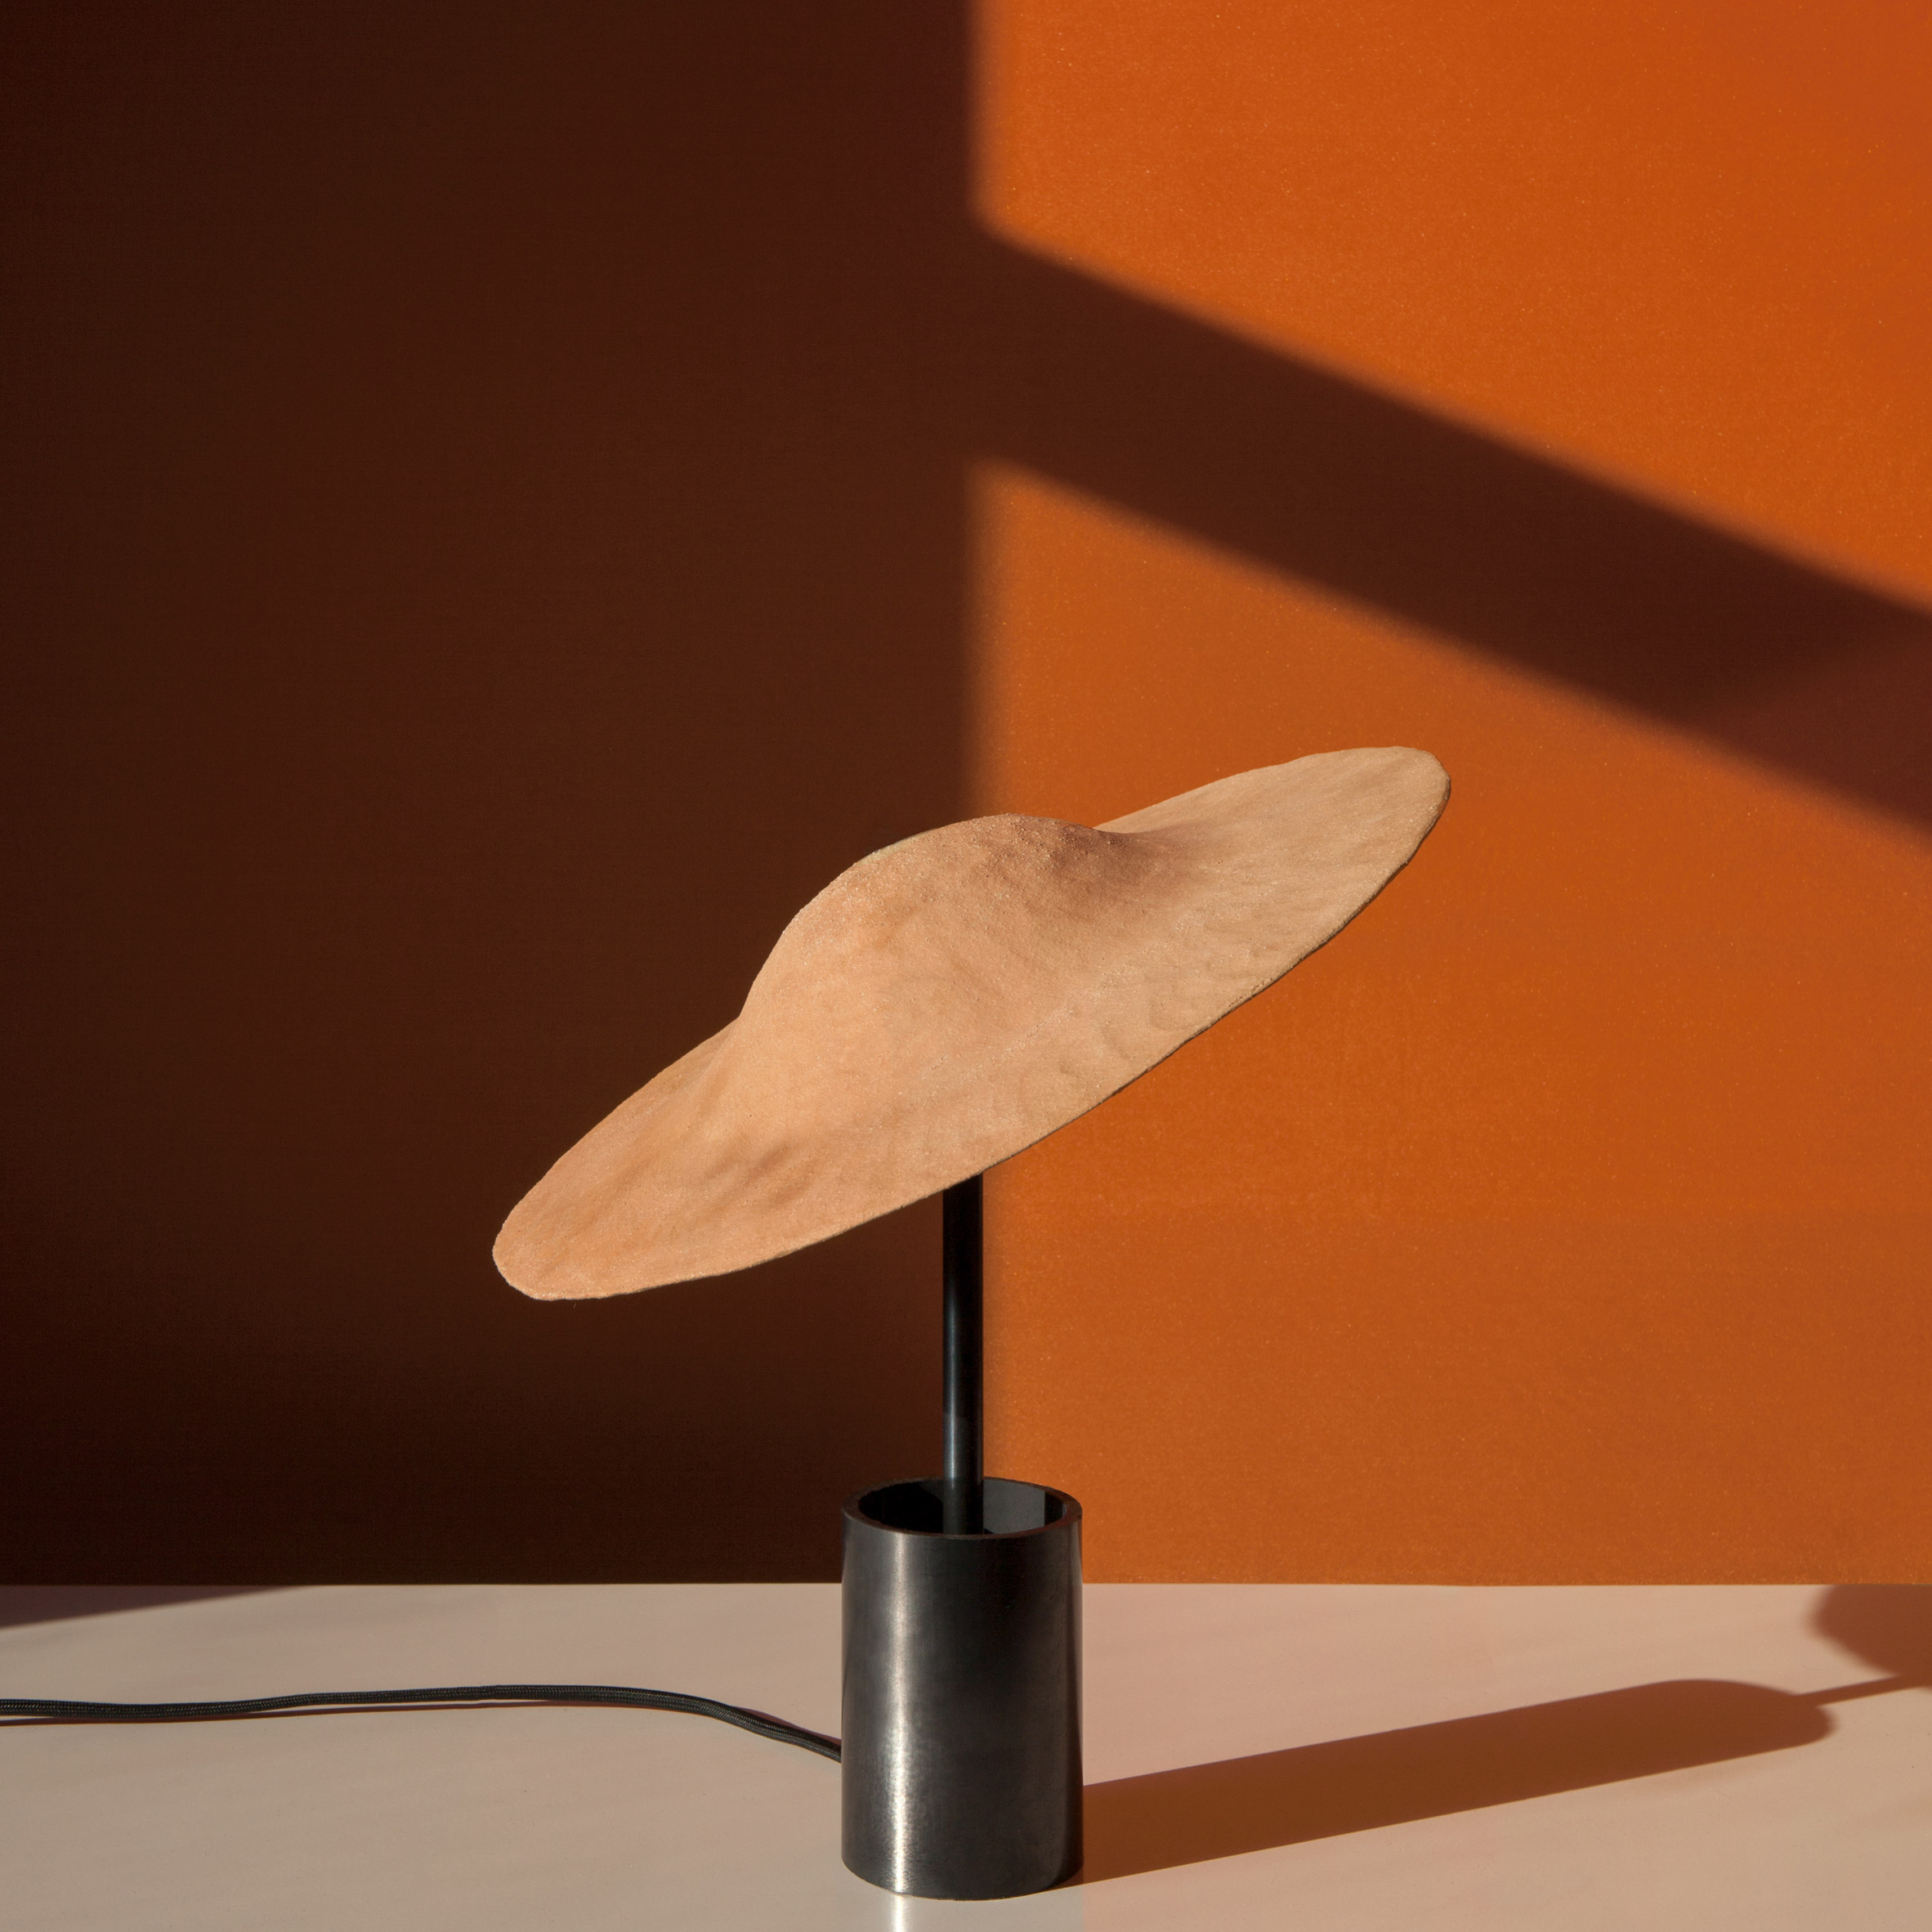 In Common With launches lamps with handmade clay shades